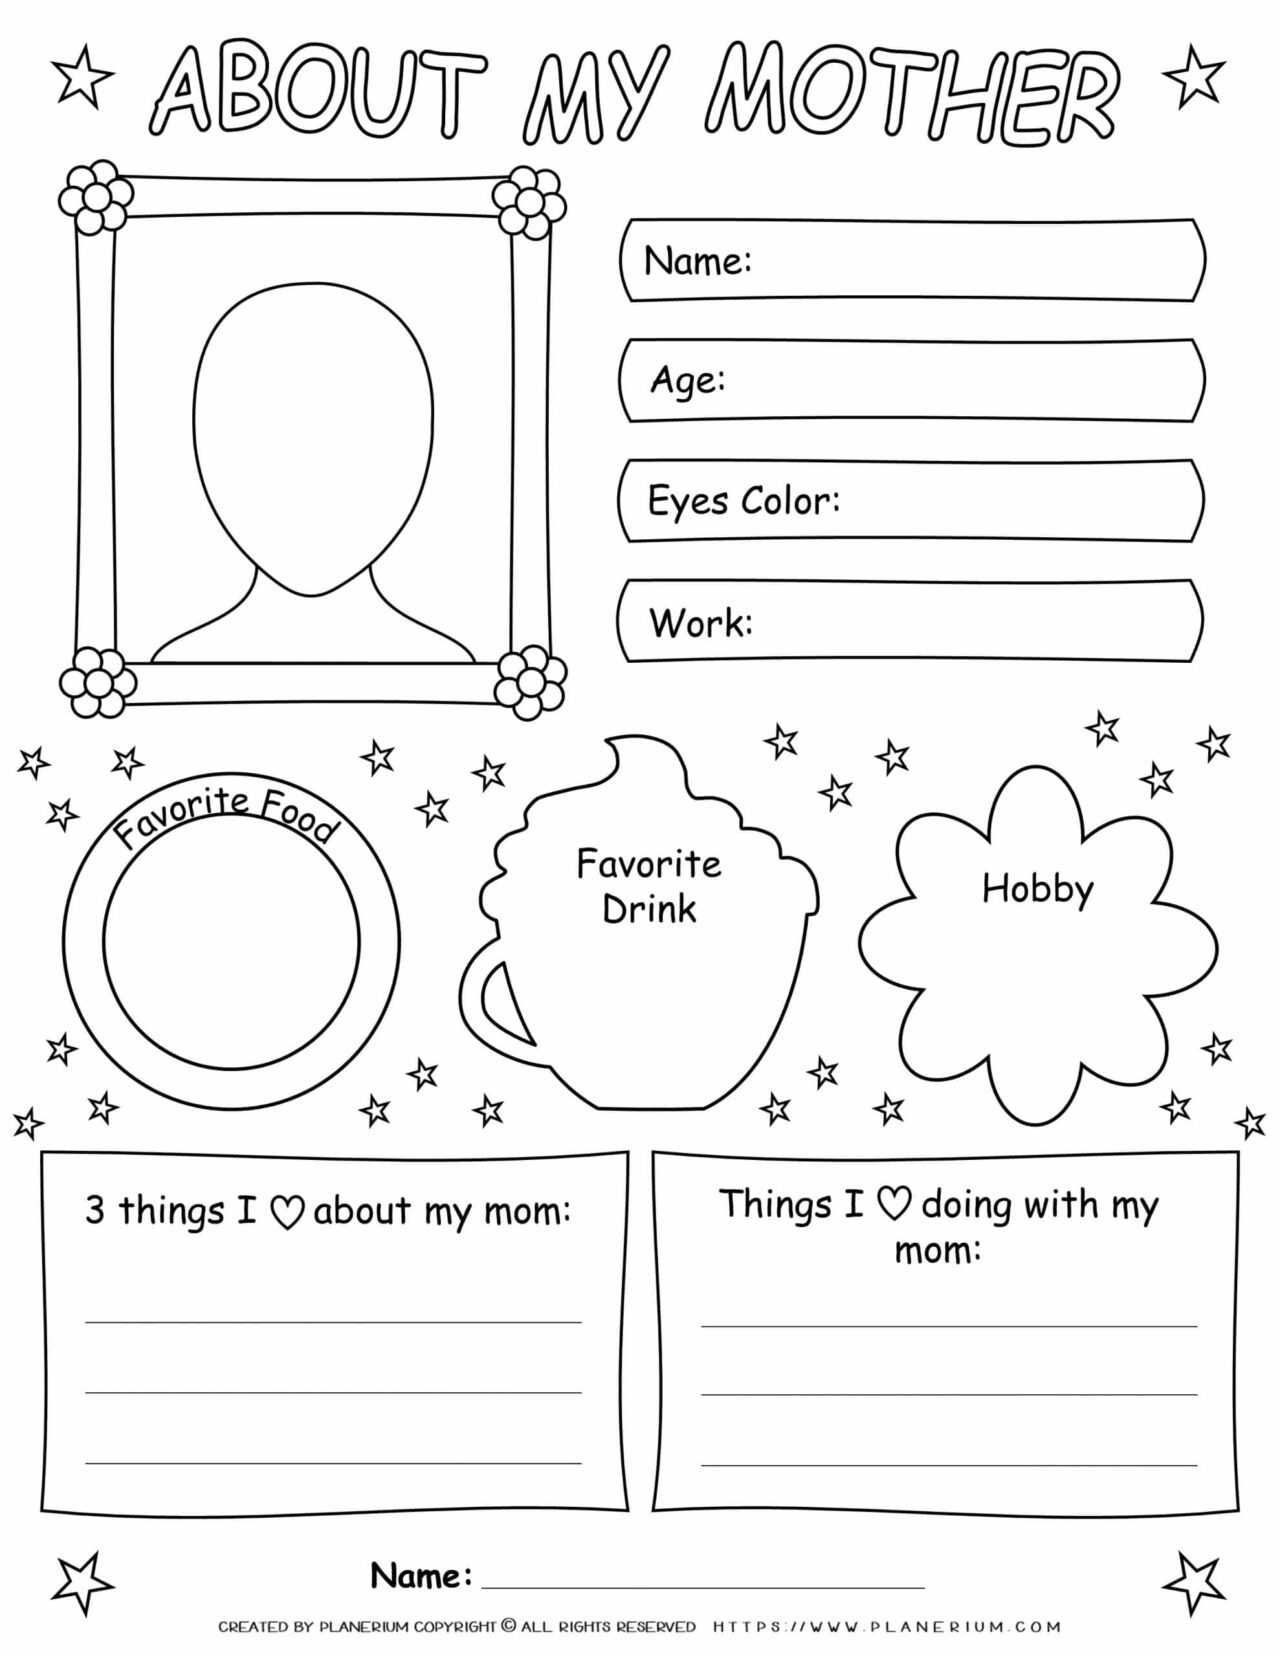 Mother's Day Worksheet - About My Mother